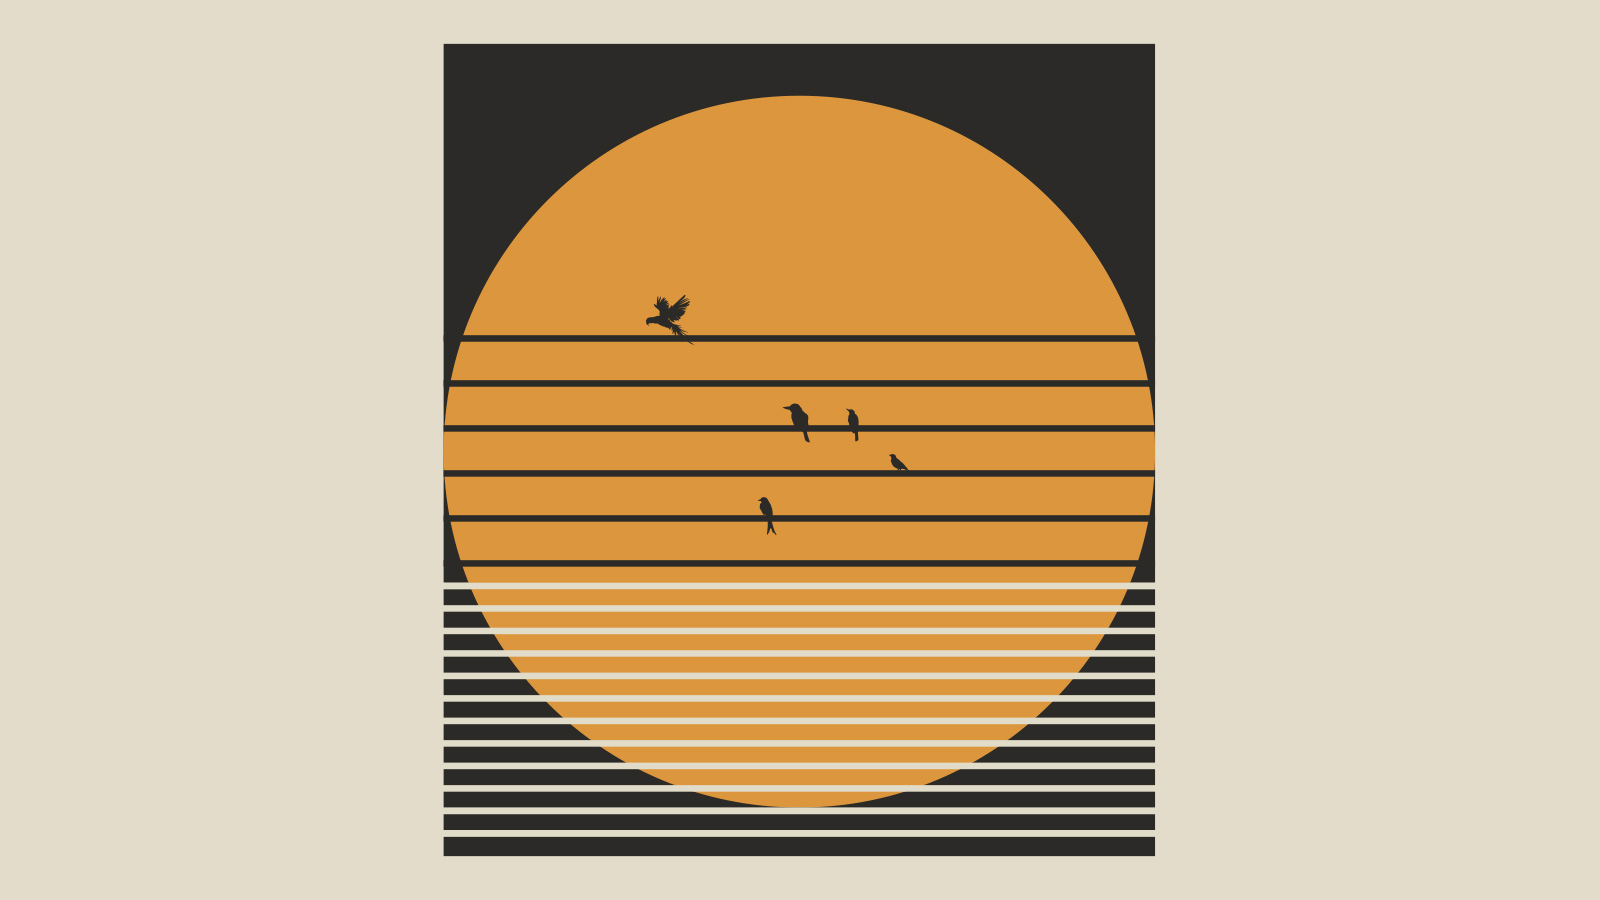 An orange circle on a black rectangle with black horizontal wires across the center and silhouette of 5 birds sitting on the wires.